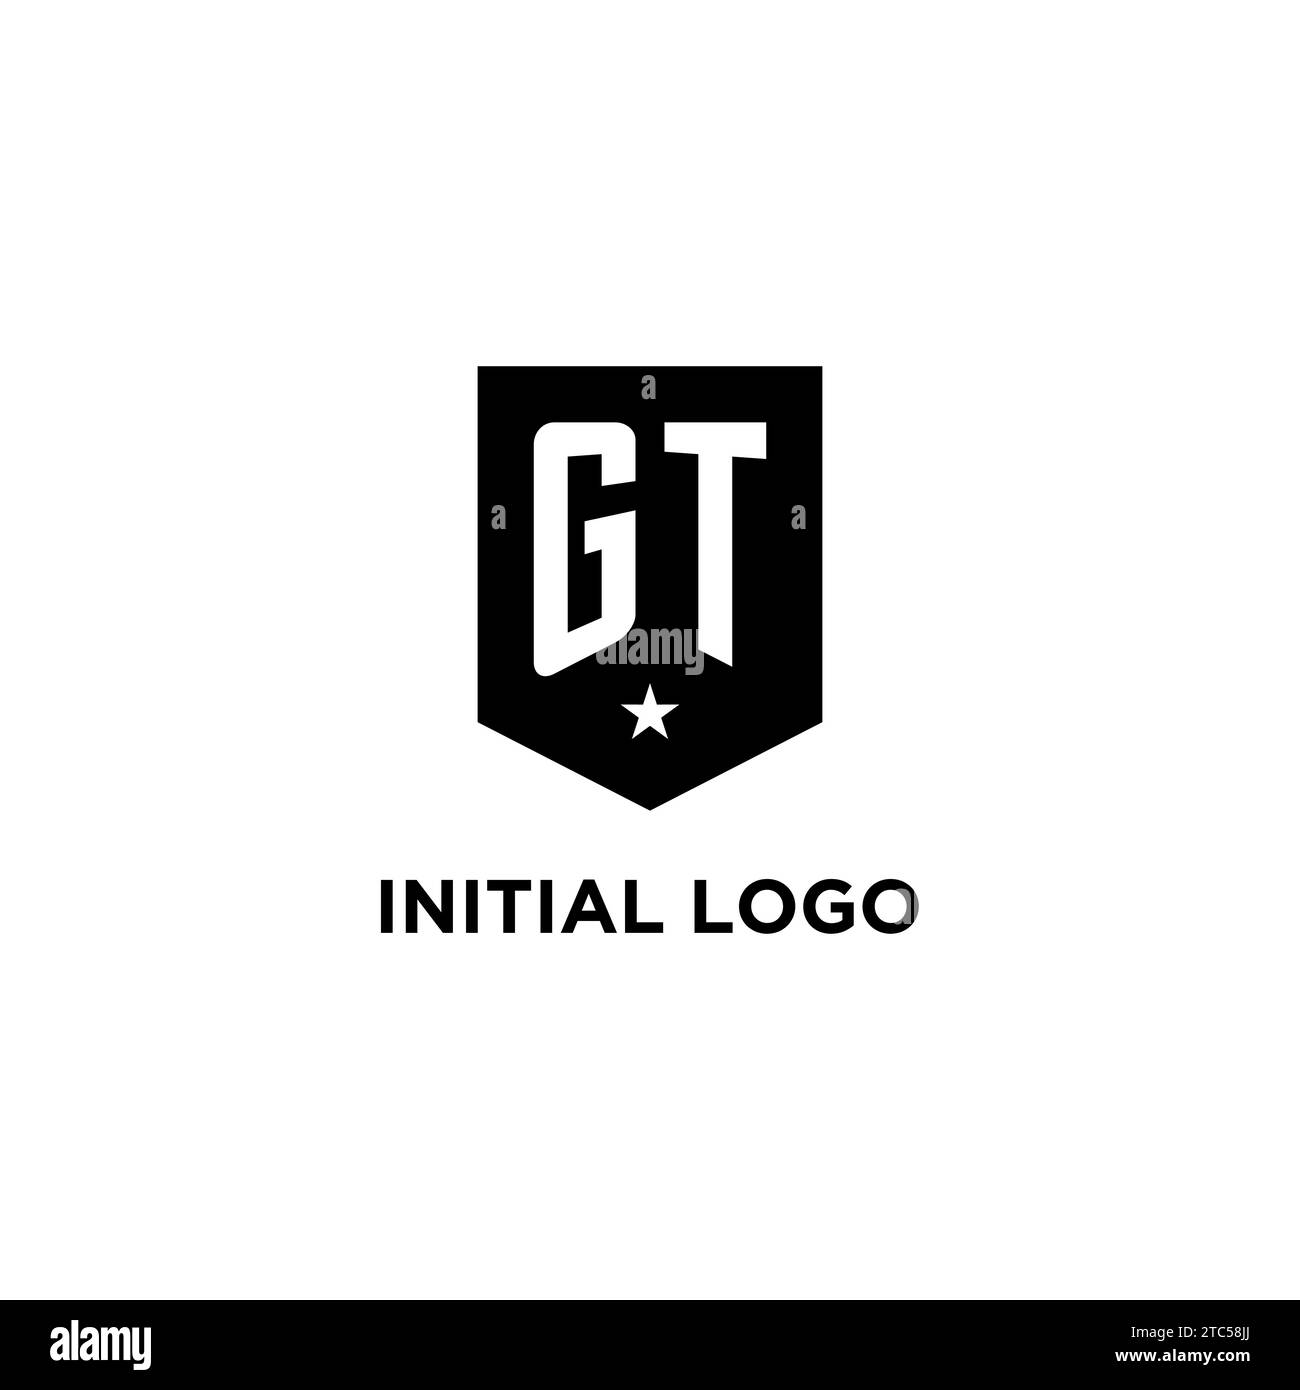 GT monogram initial logo with geometric shield and star icon design style ideas Stock Vector